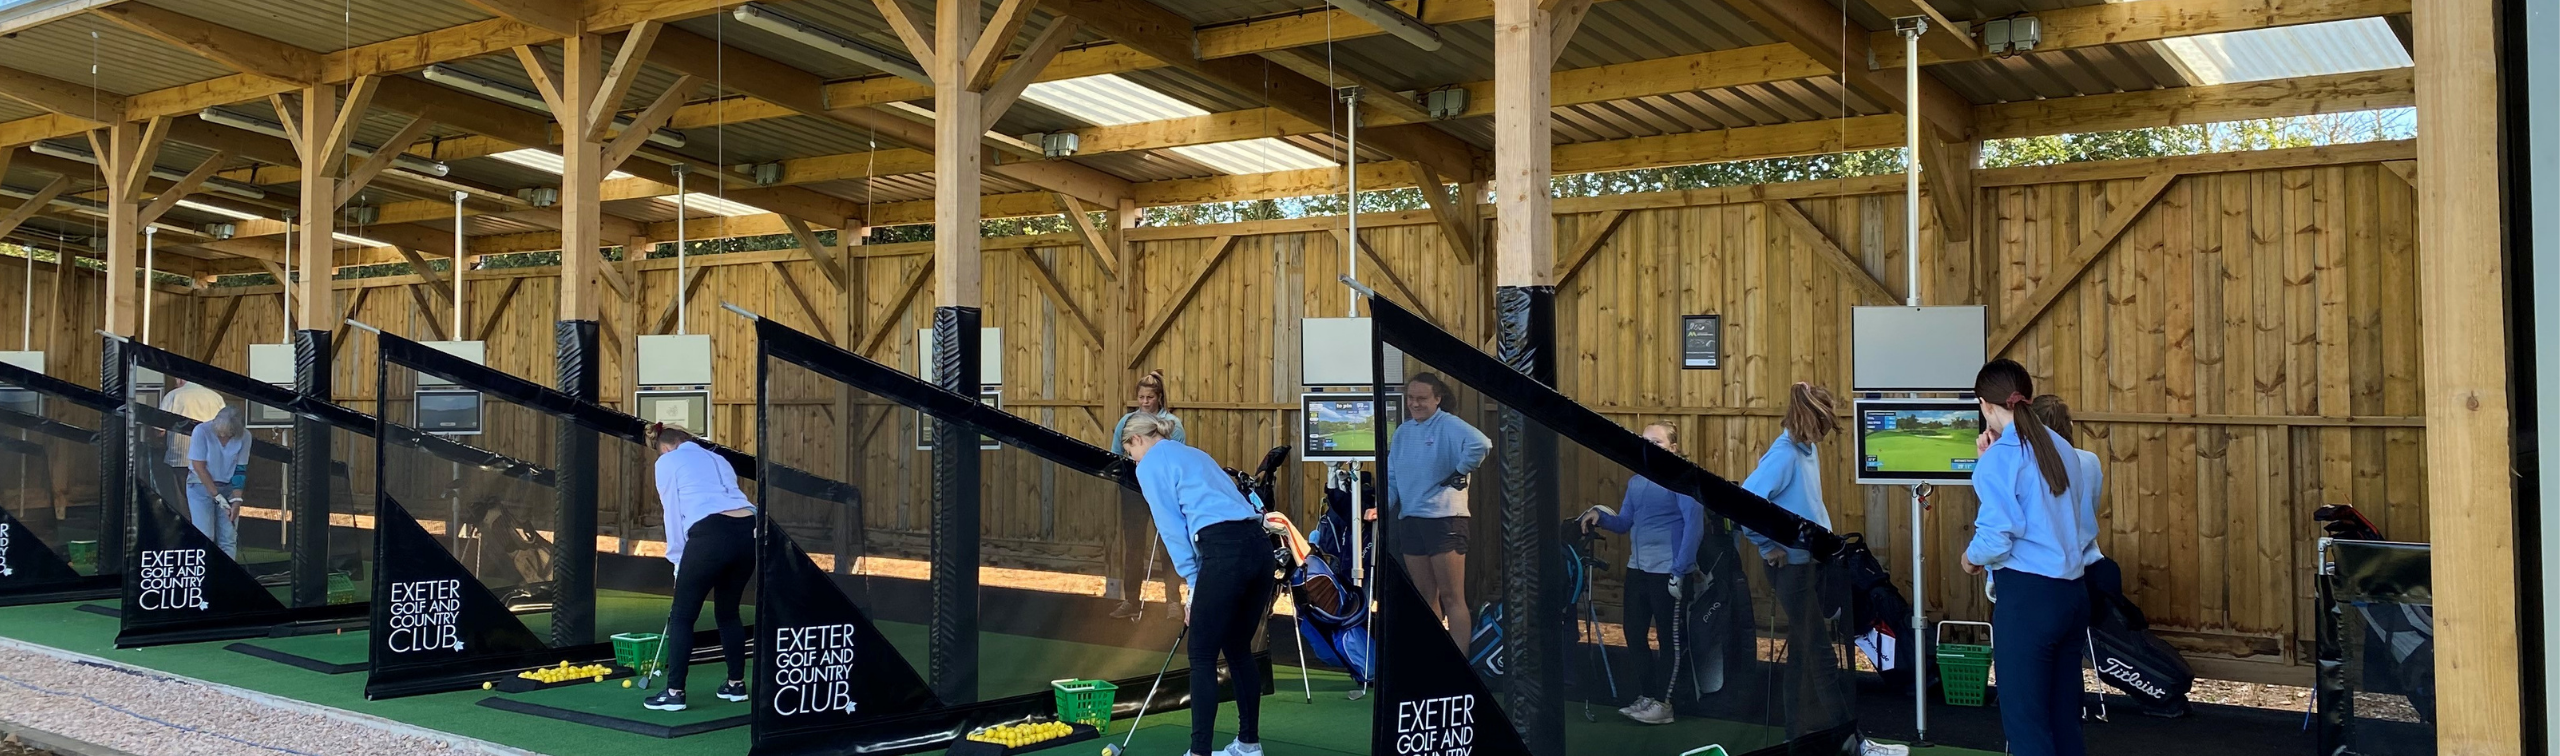 golf coaching, professional golf coaching, golf pro, golf coaches, devon golf coaching, childrens golf coaching, beginners golf coaching, get into golf, learn to play golf exeter, darren everett, exeter golf and country club